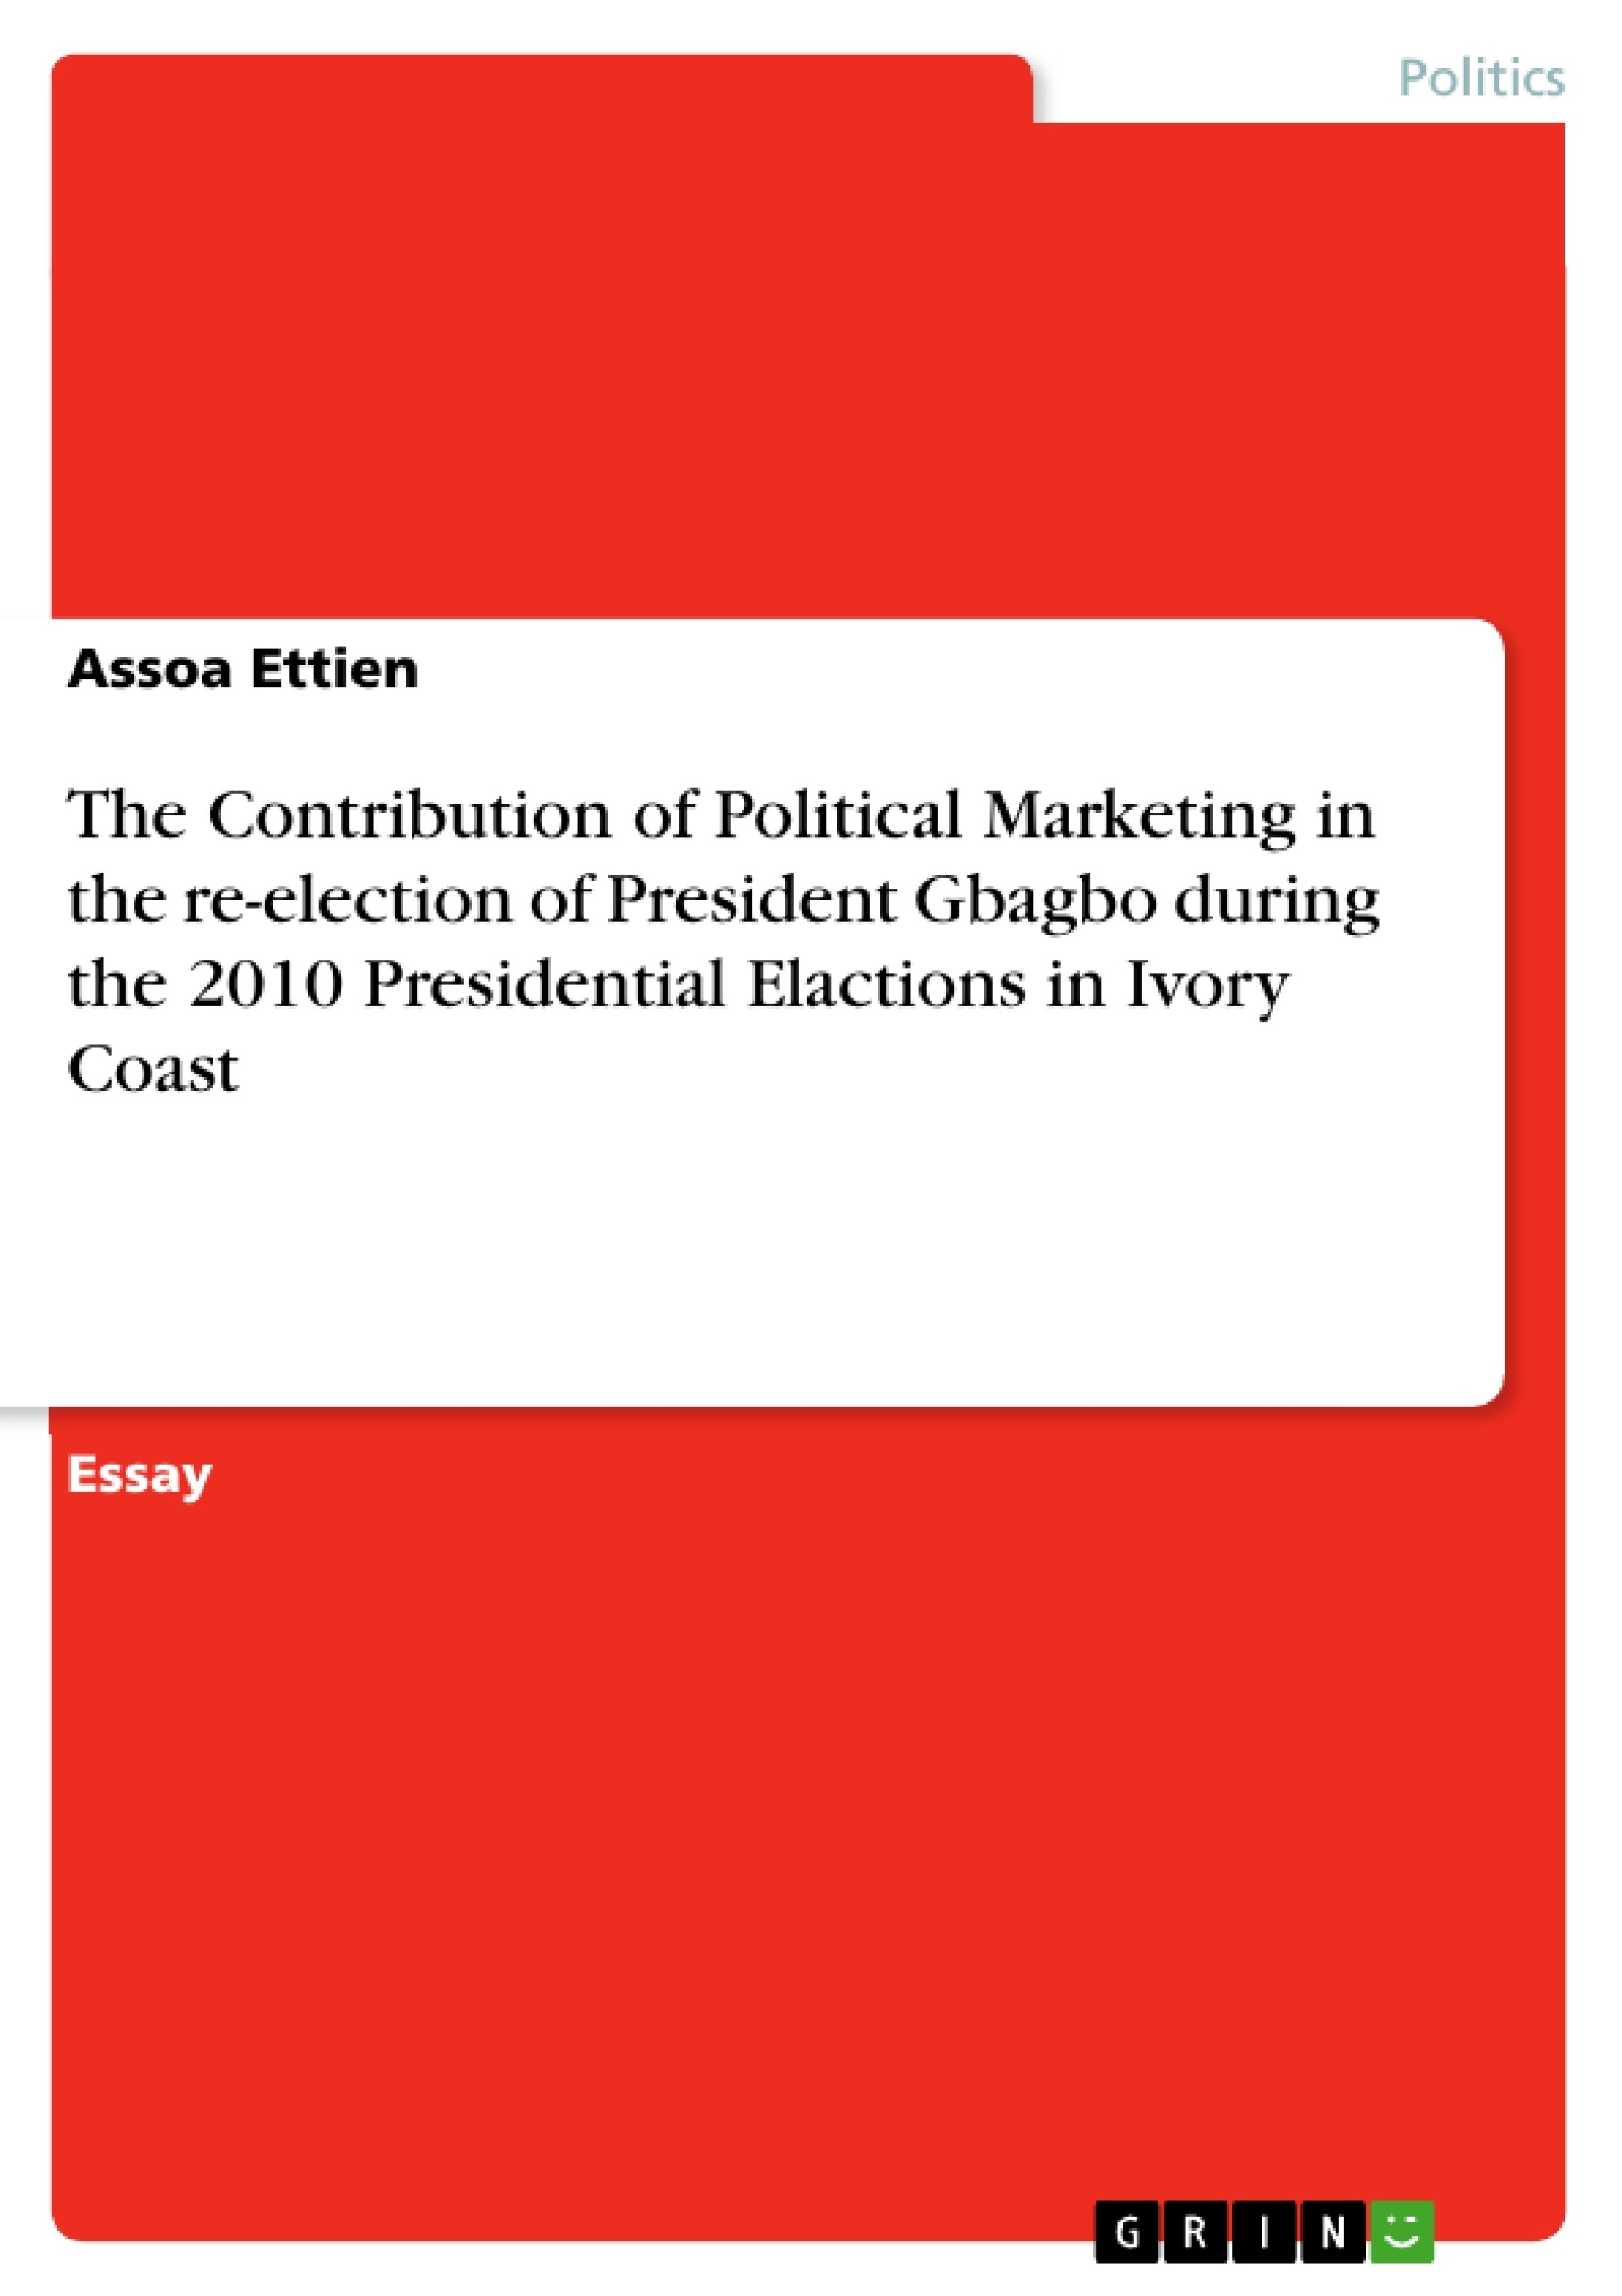 Título: The Contribution of Political Marketing in the re-election of President Gbagbo during the 2010 Presidential Elactions in Ivory Coast